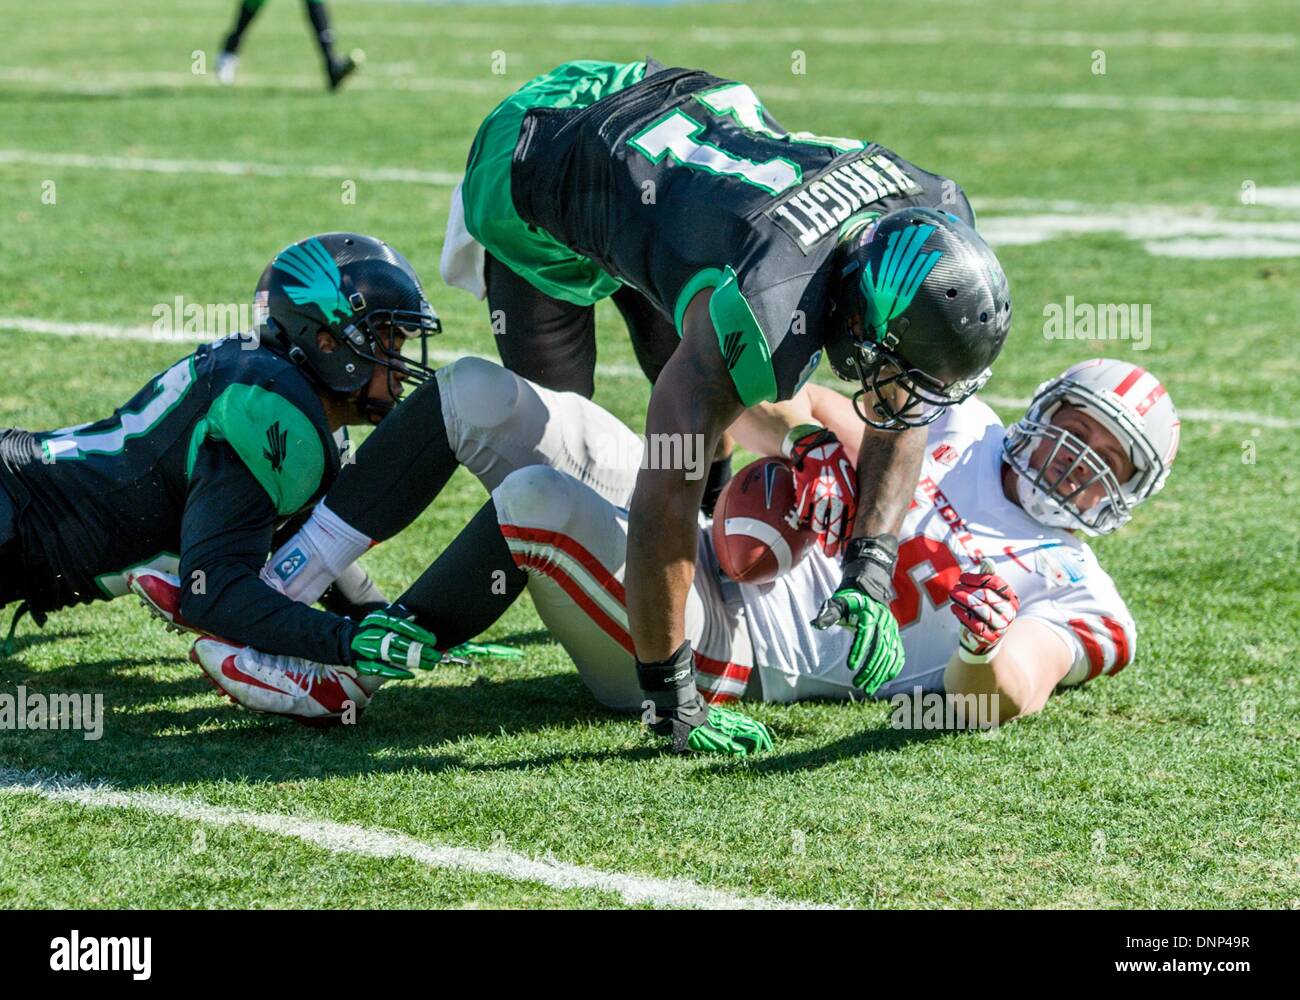 Dallas, Texas, USA. January 1st, 2014: .UNLV Rebels tight end Taylor Barnhill (16) catches a pass as he is defended by North Texas Mean Green defensive back James Jones (13) and North Texas Mean Green linebacker Will Wright (11).during the 2014 Heart of Dallas Bowl football game between the University Las Vegas Nevada Rebels and the North Texas Mean Green Eagles at Cotton Bowl Stadium in Dallas, Texas. Credit:  Cal Sport Media/Alamy Live News Stock Photo